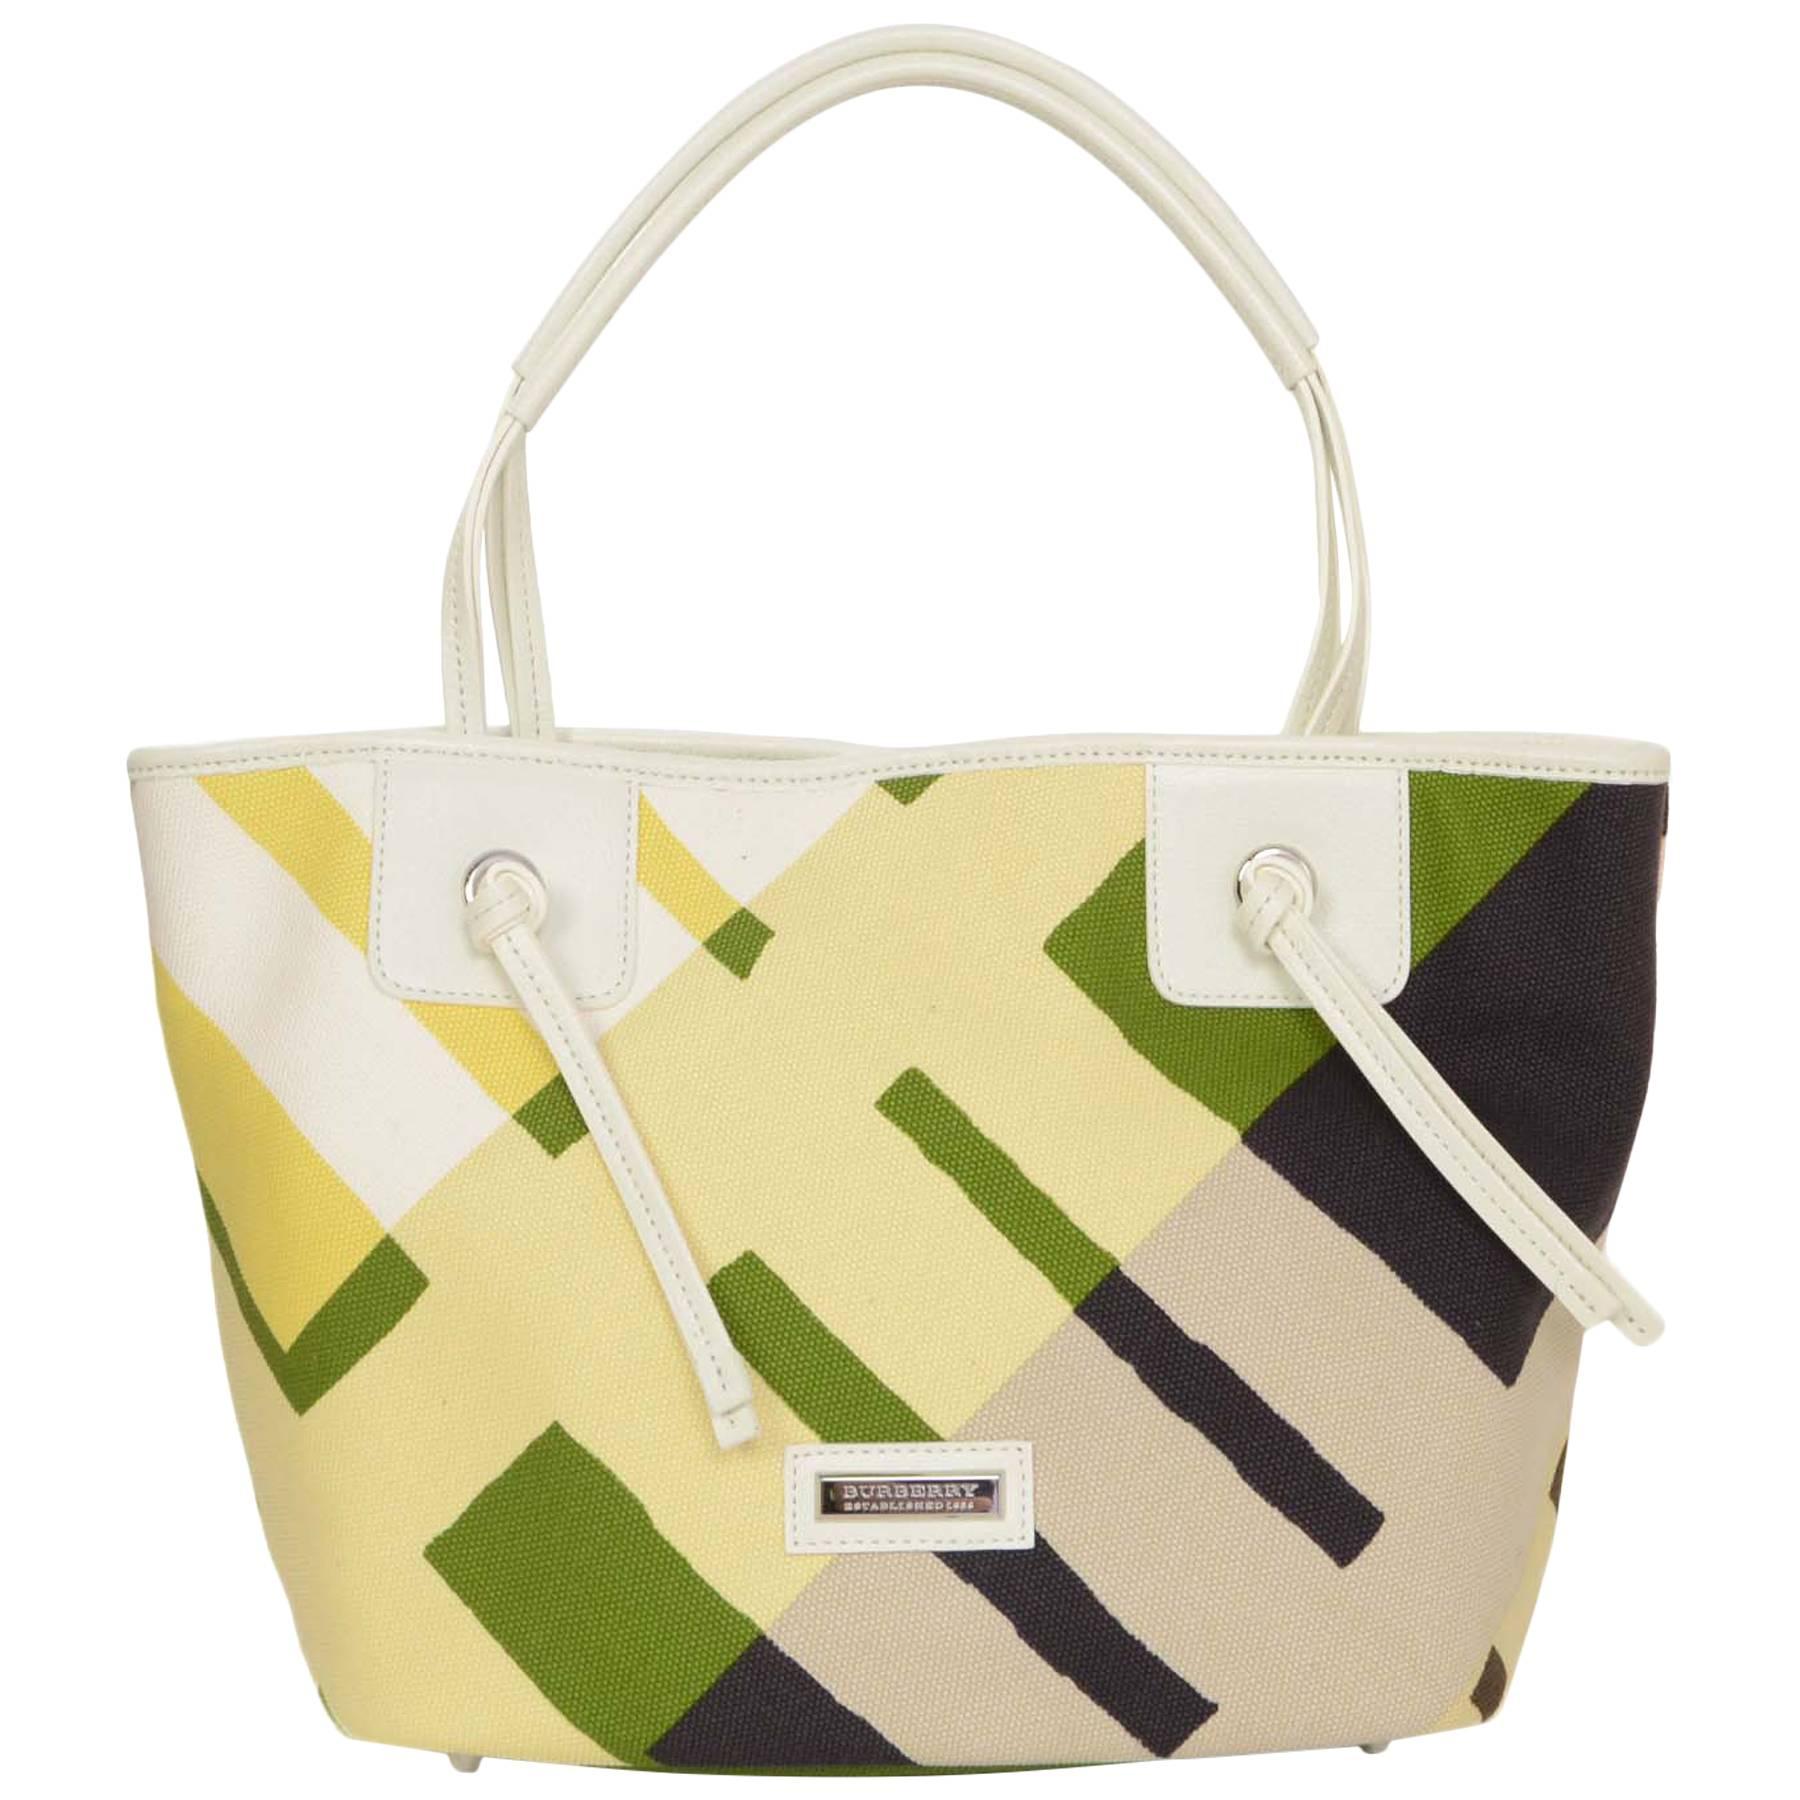 Burberry New Multi-Colored Printed Canvas Tote Bag SHW